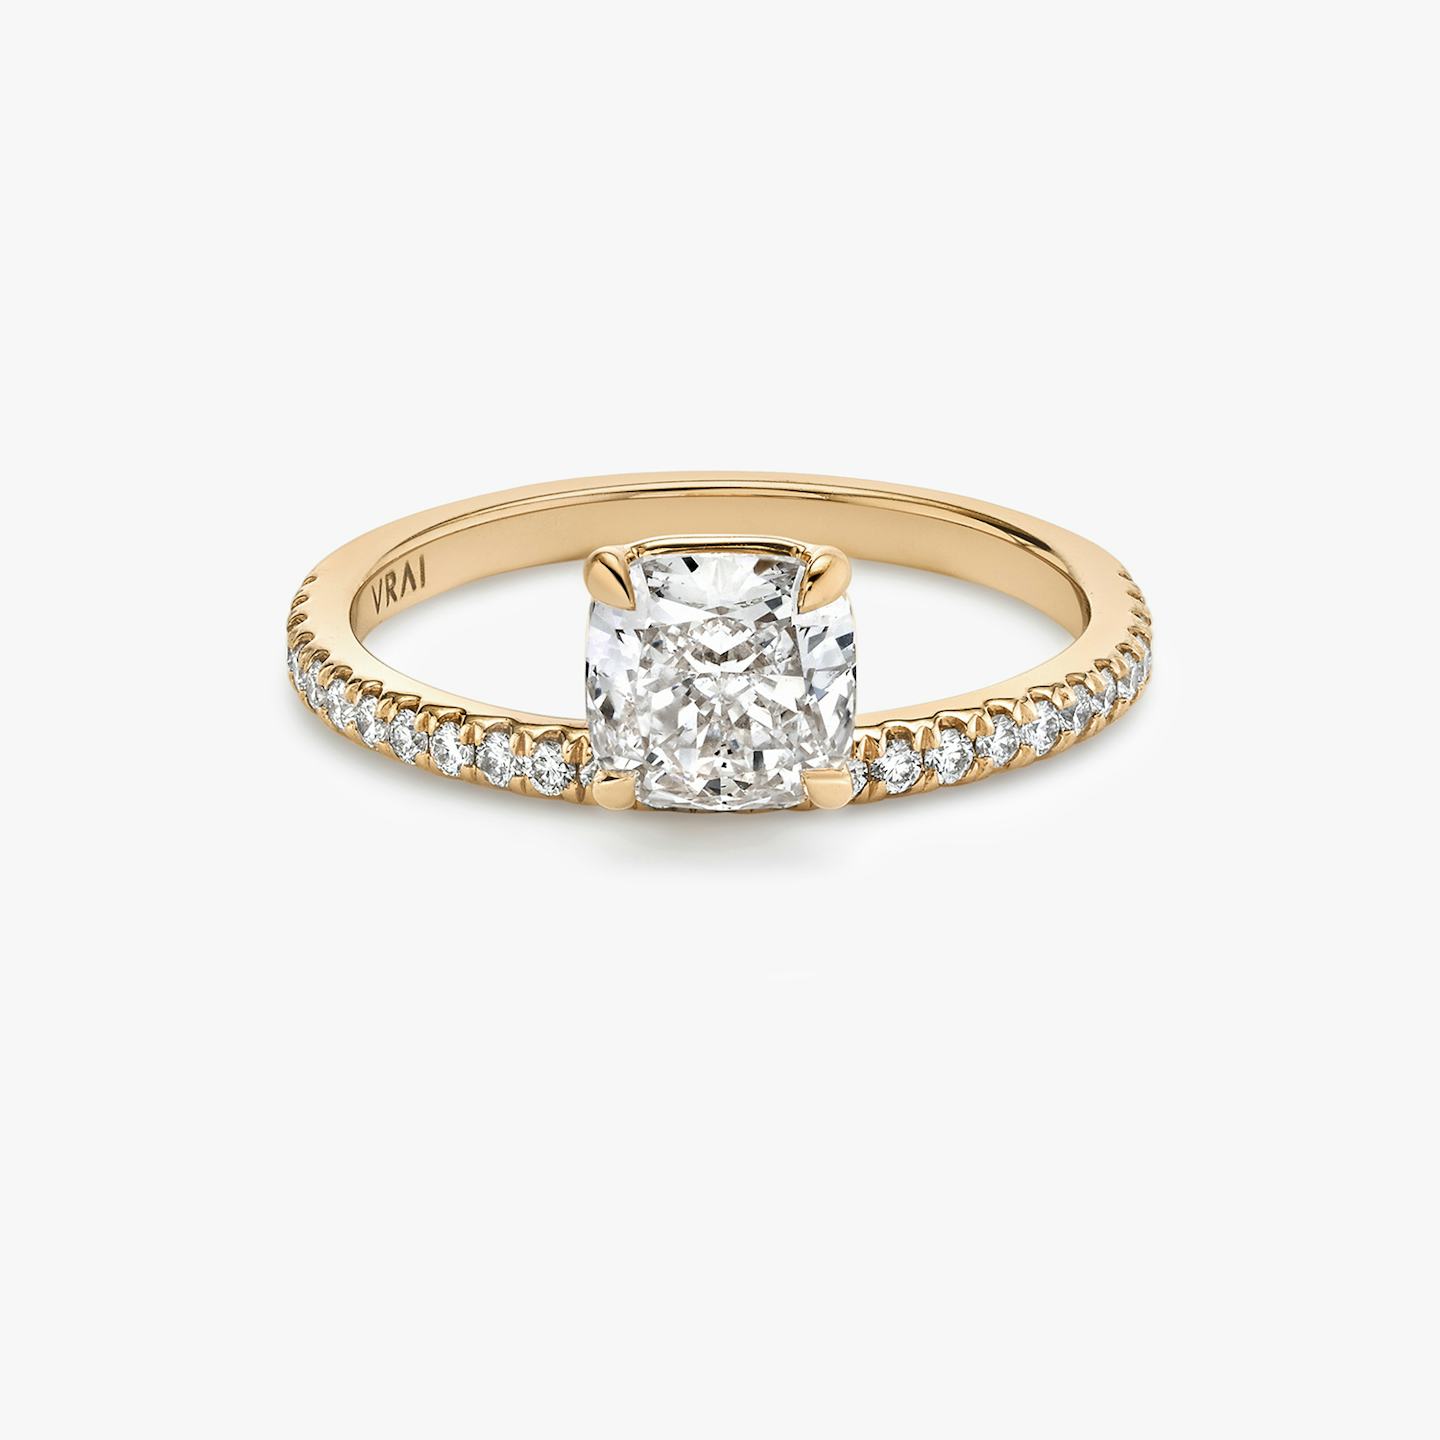 Rose gold Hover engagement ring with Cushion cut diamond